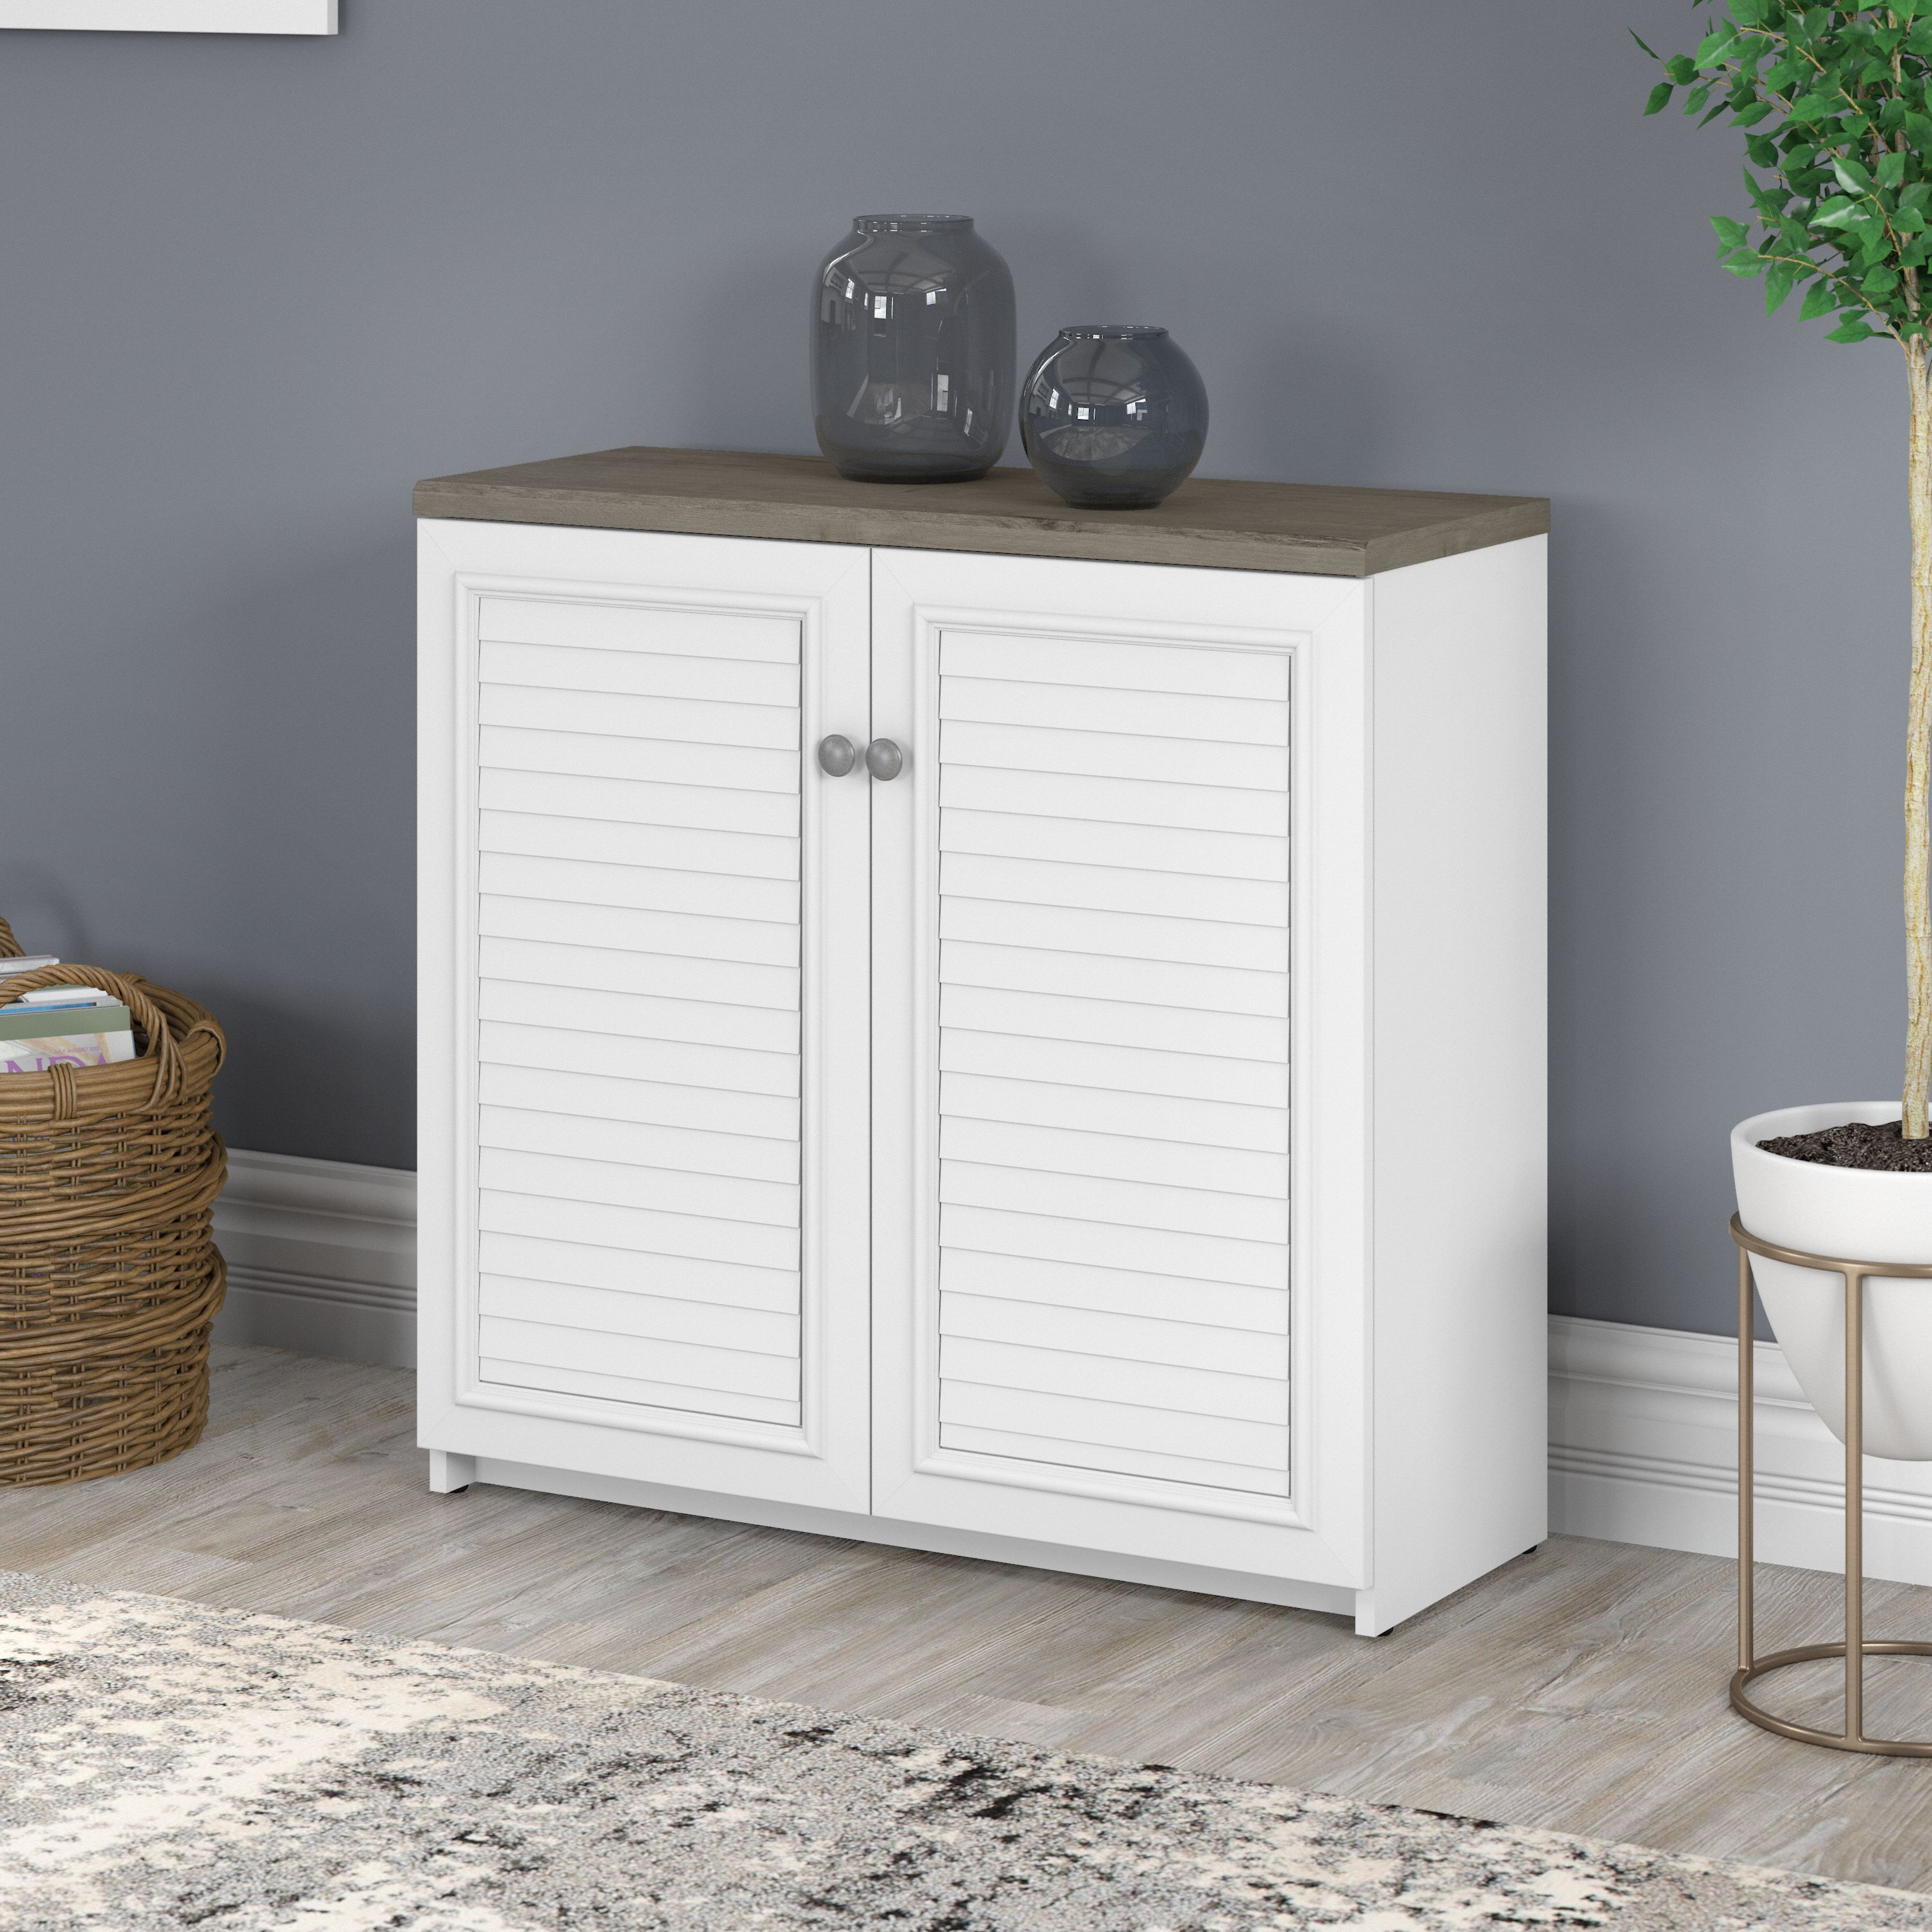 Shop Bush Furniture Fairview Small Storage Cabinet with Doors and Shelves 01 WC53696-03 #color_shiplap gray/pure white